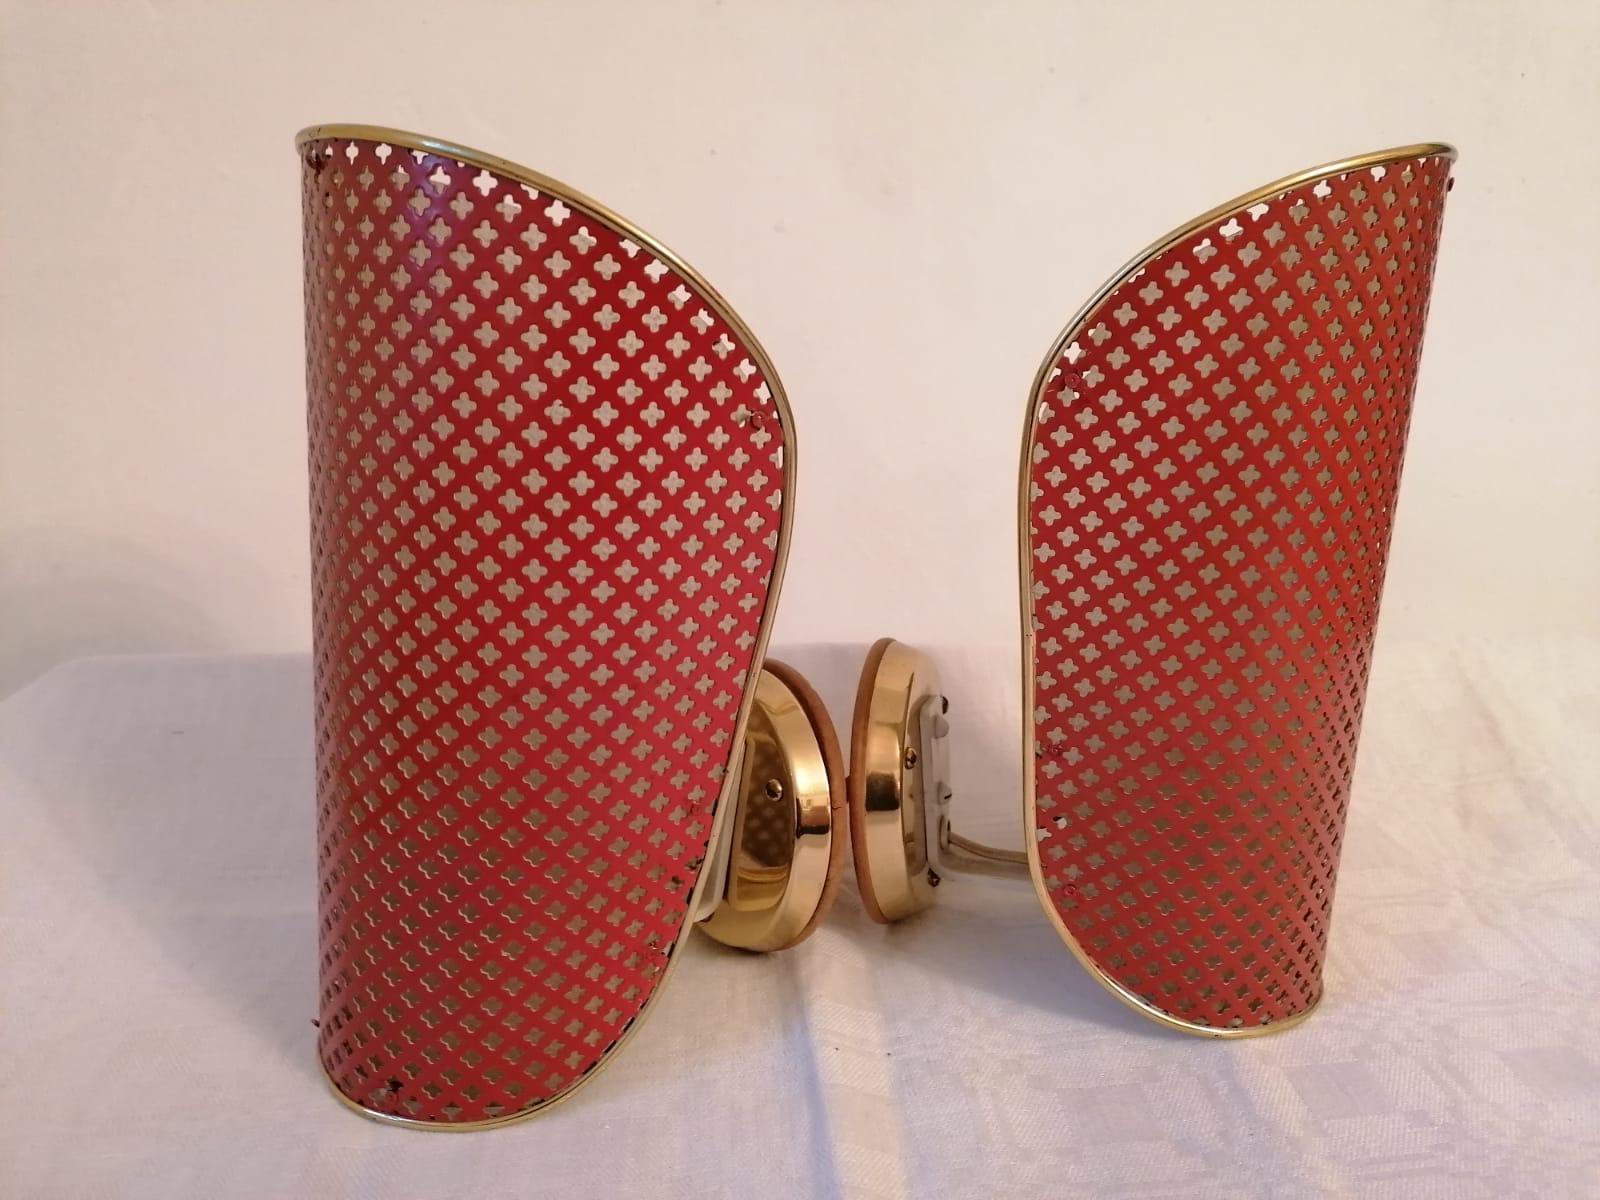 Brass construction with steel performed red lacquered shades each fitted with one E27 Socket. Made in Austria in the 1950s and attributed to Rupert Nikoll as manufacturer.